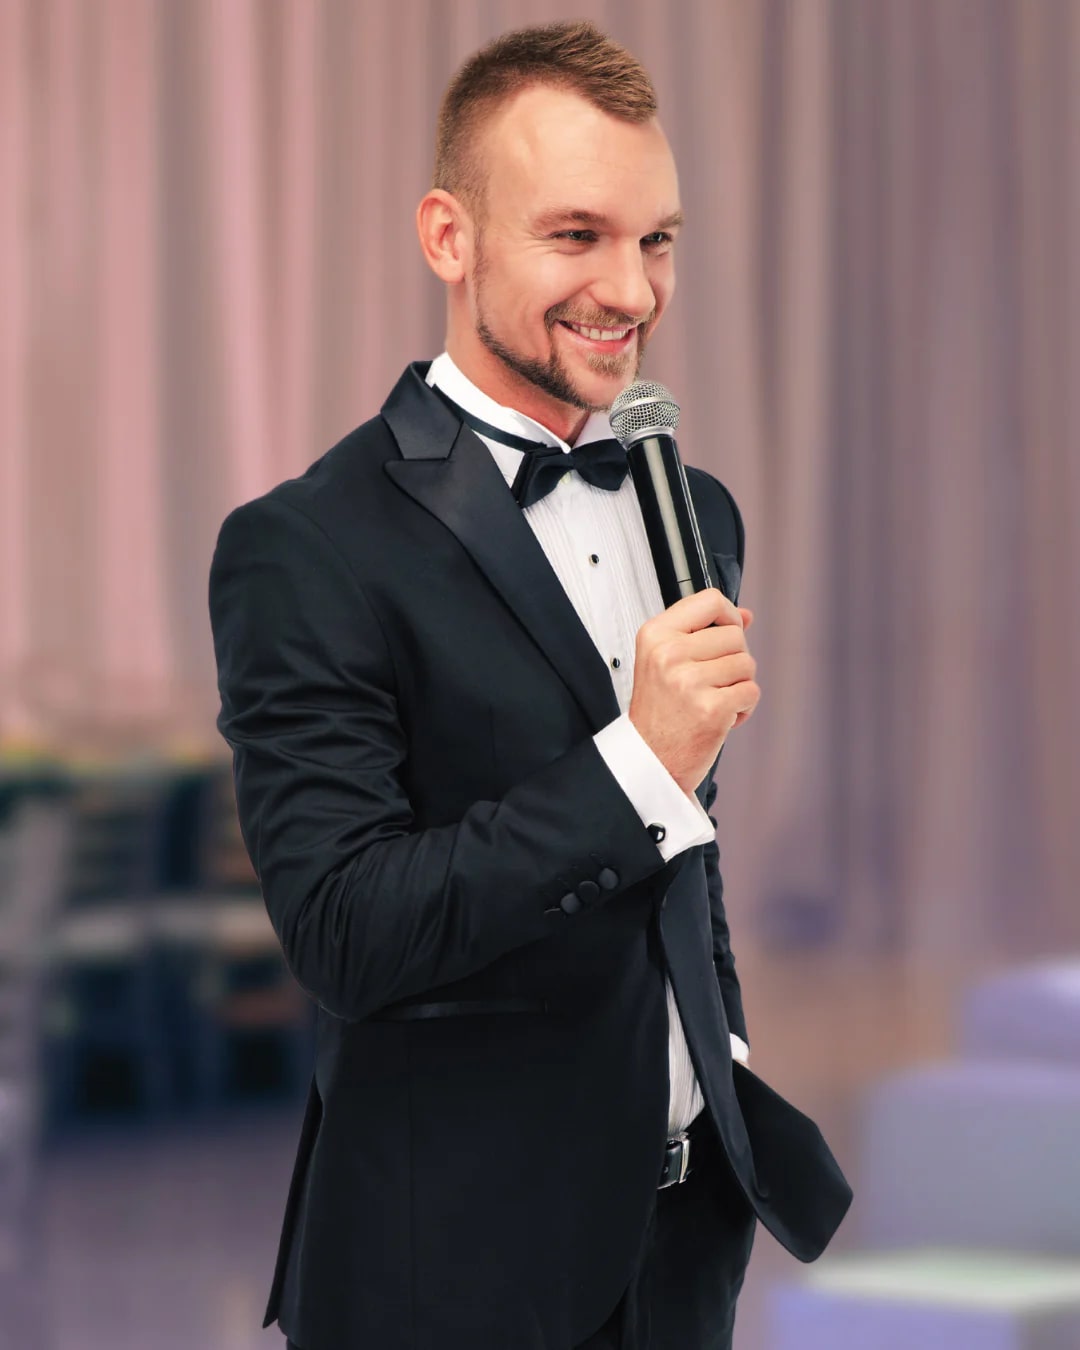 A handsome man in a tuxedo smiles and speaks into a microphone, delivering a funny best man speech